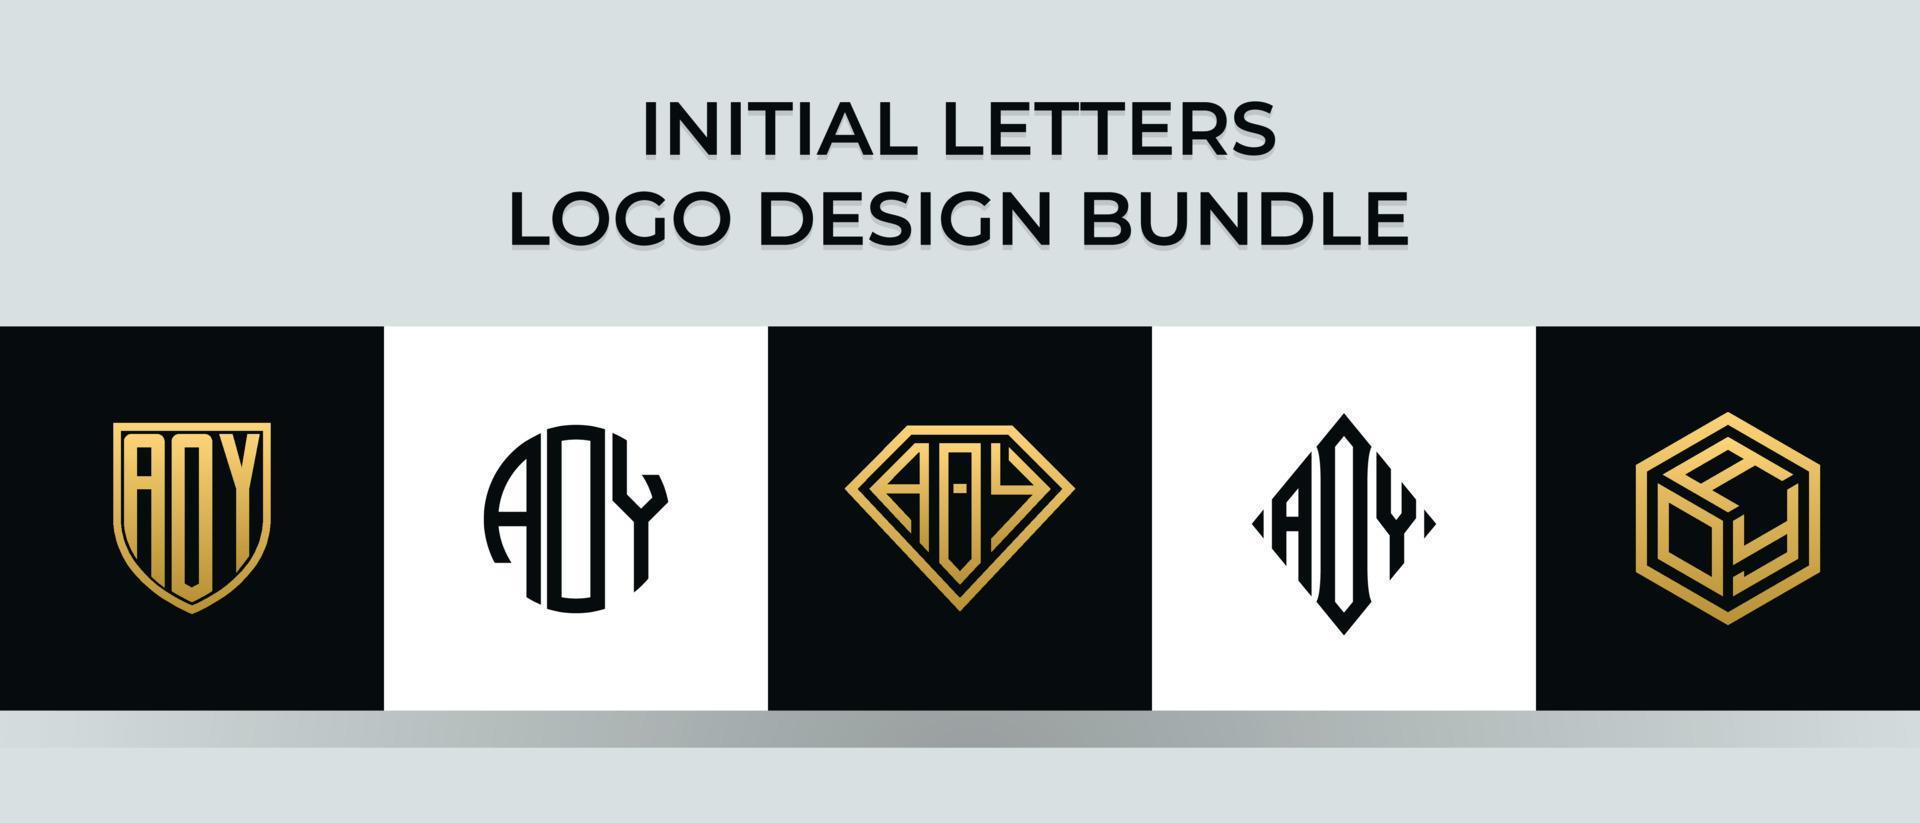 Initial letters AOY logo designs Bundle vector